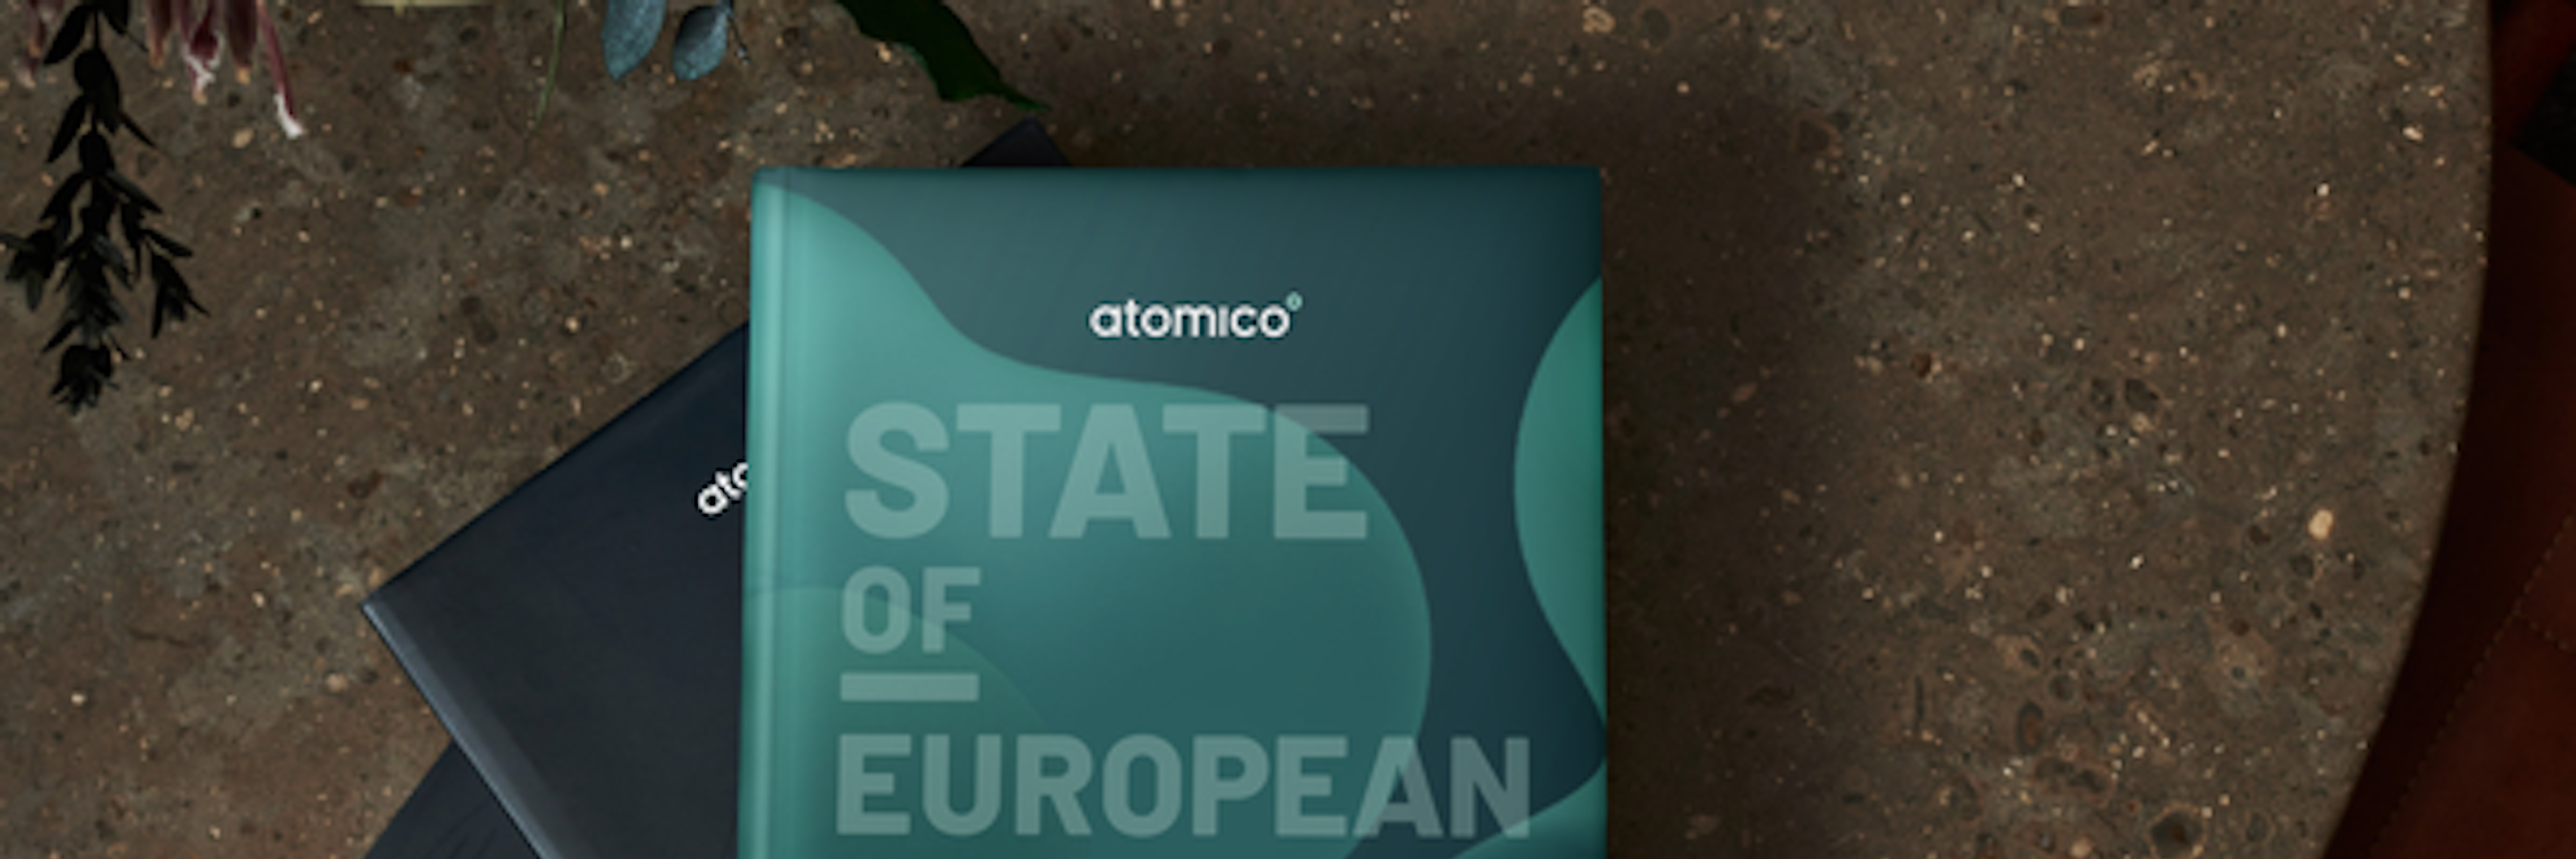 An image of Atomico's State of European tech report 2022